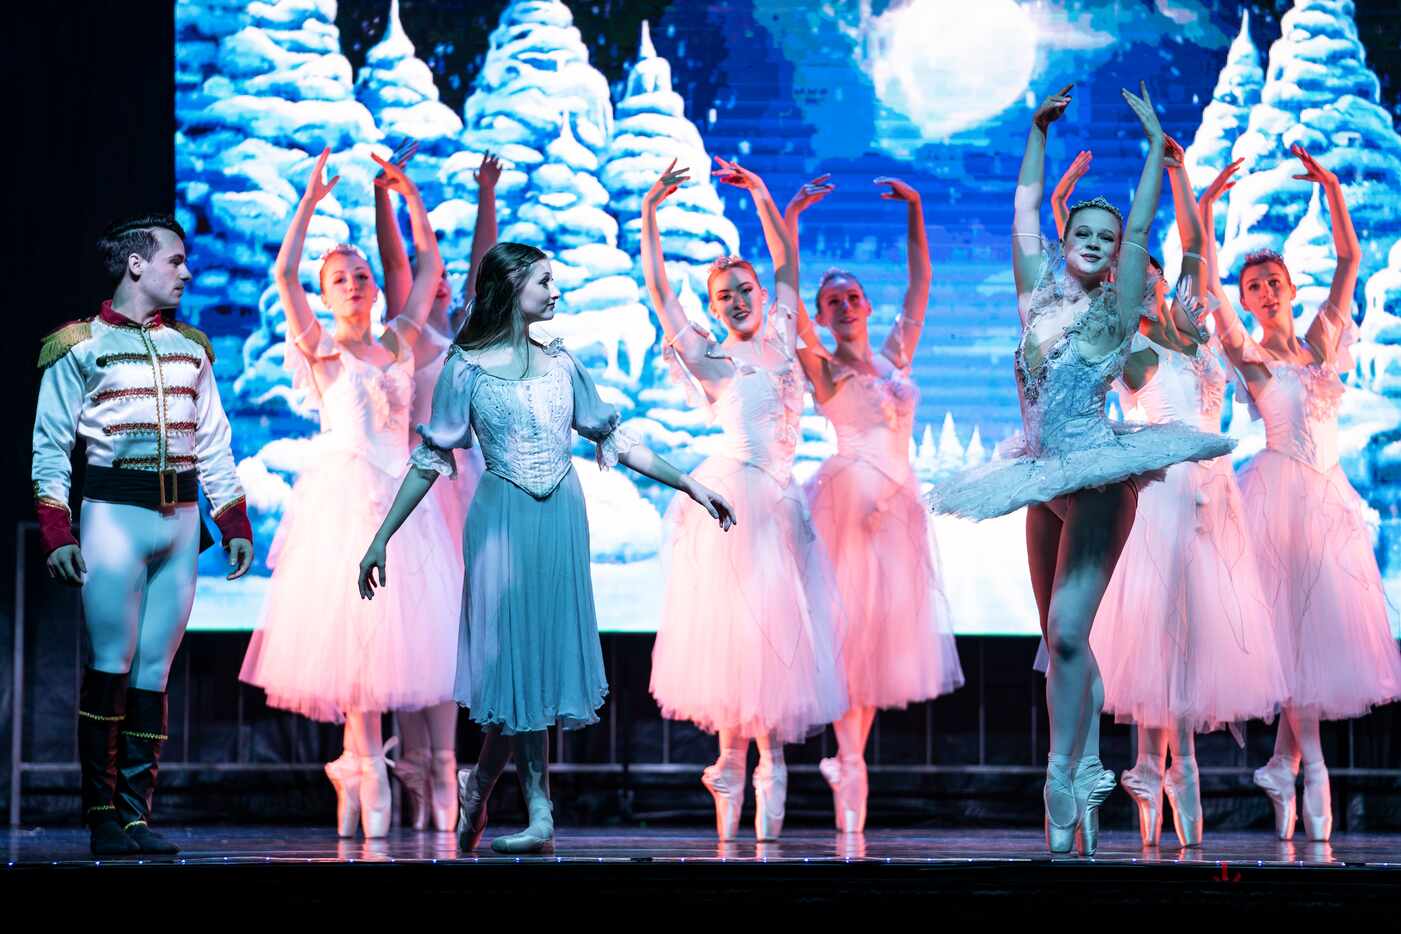 The cast puts on an amazing show during the outdoor ballet performance of "The Nutcracker"...